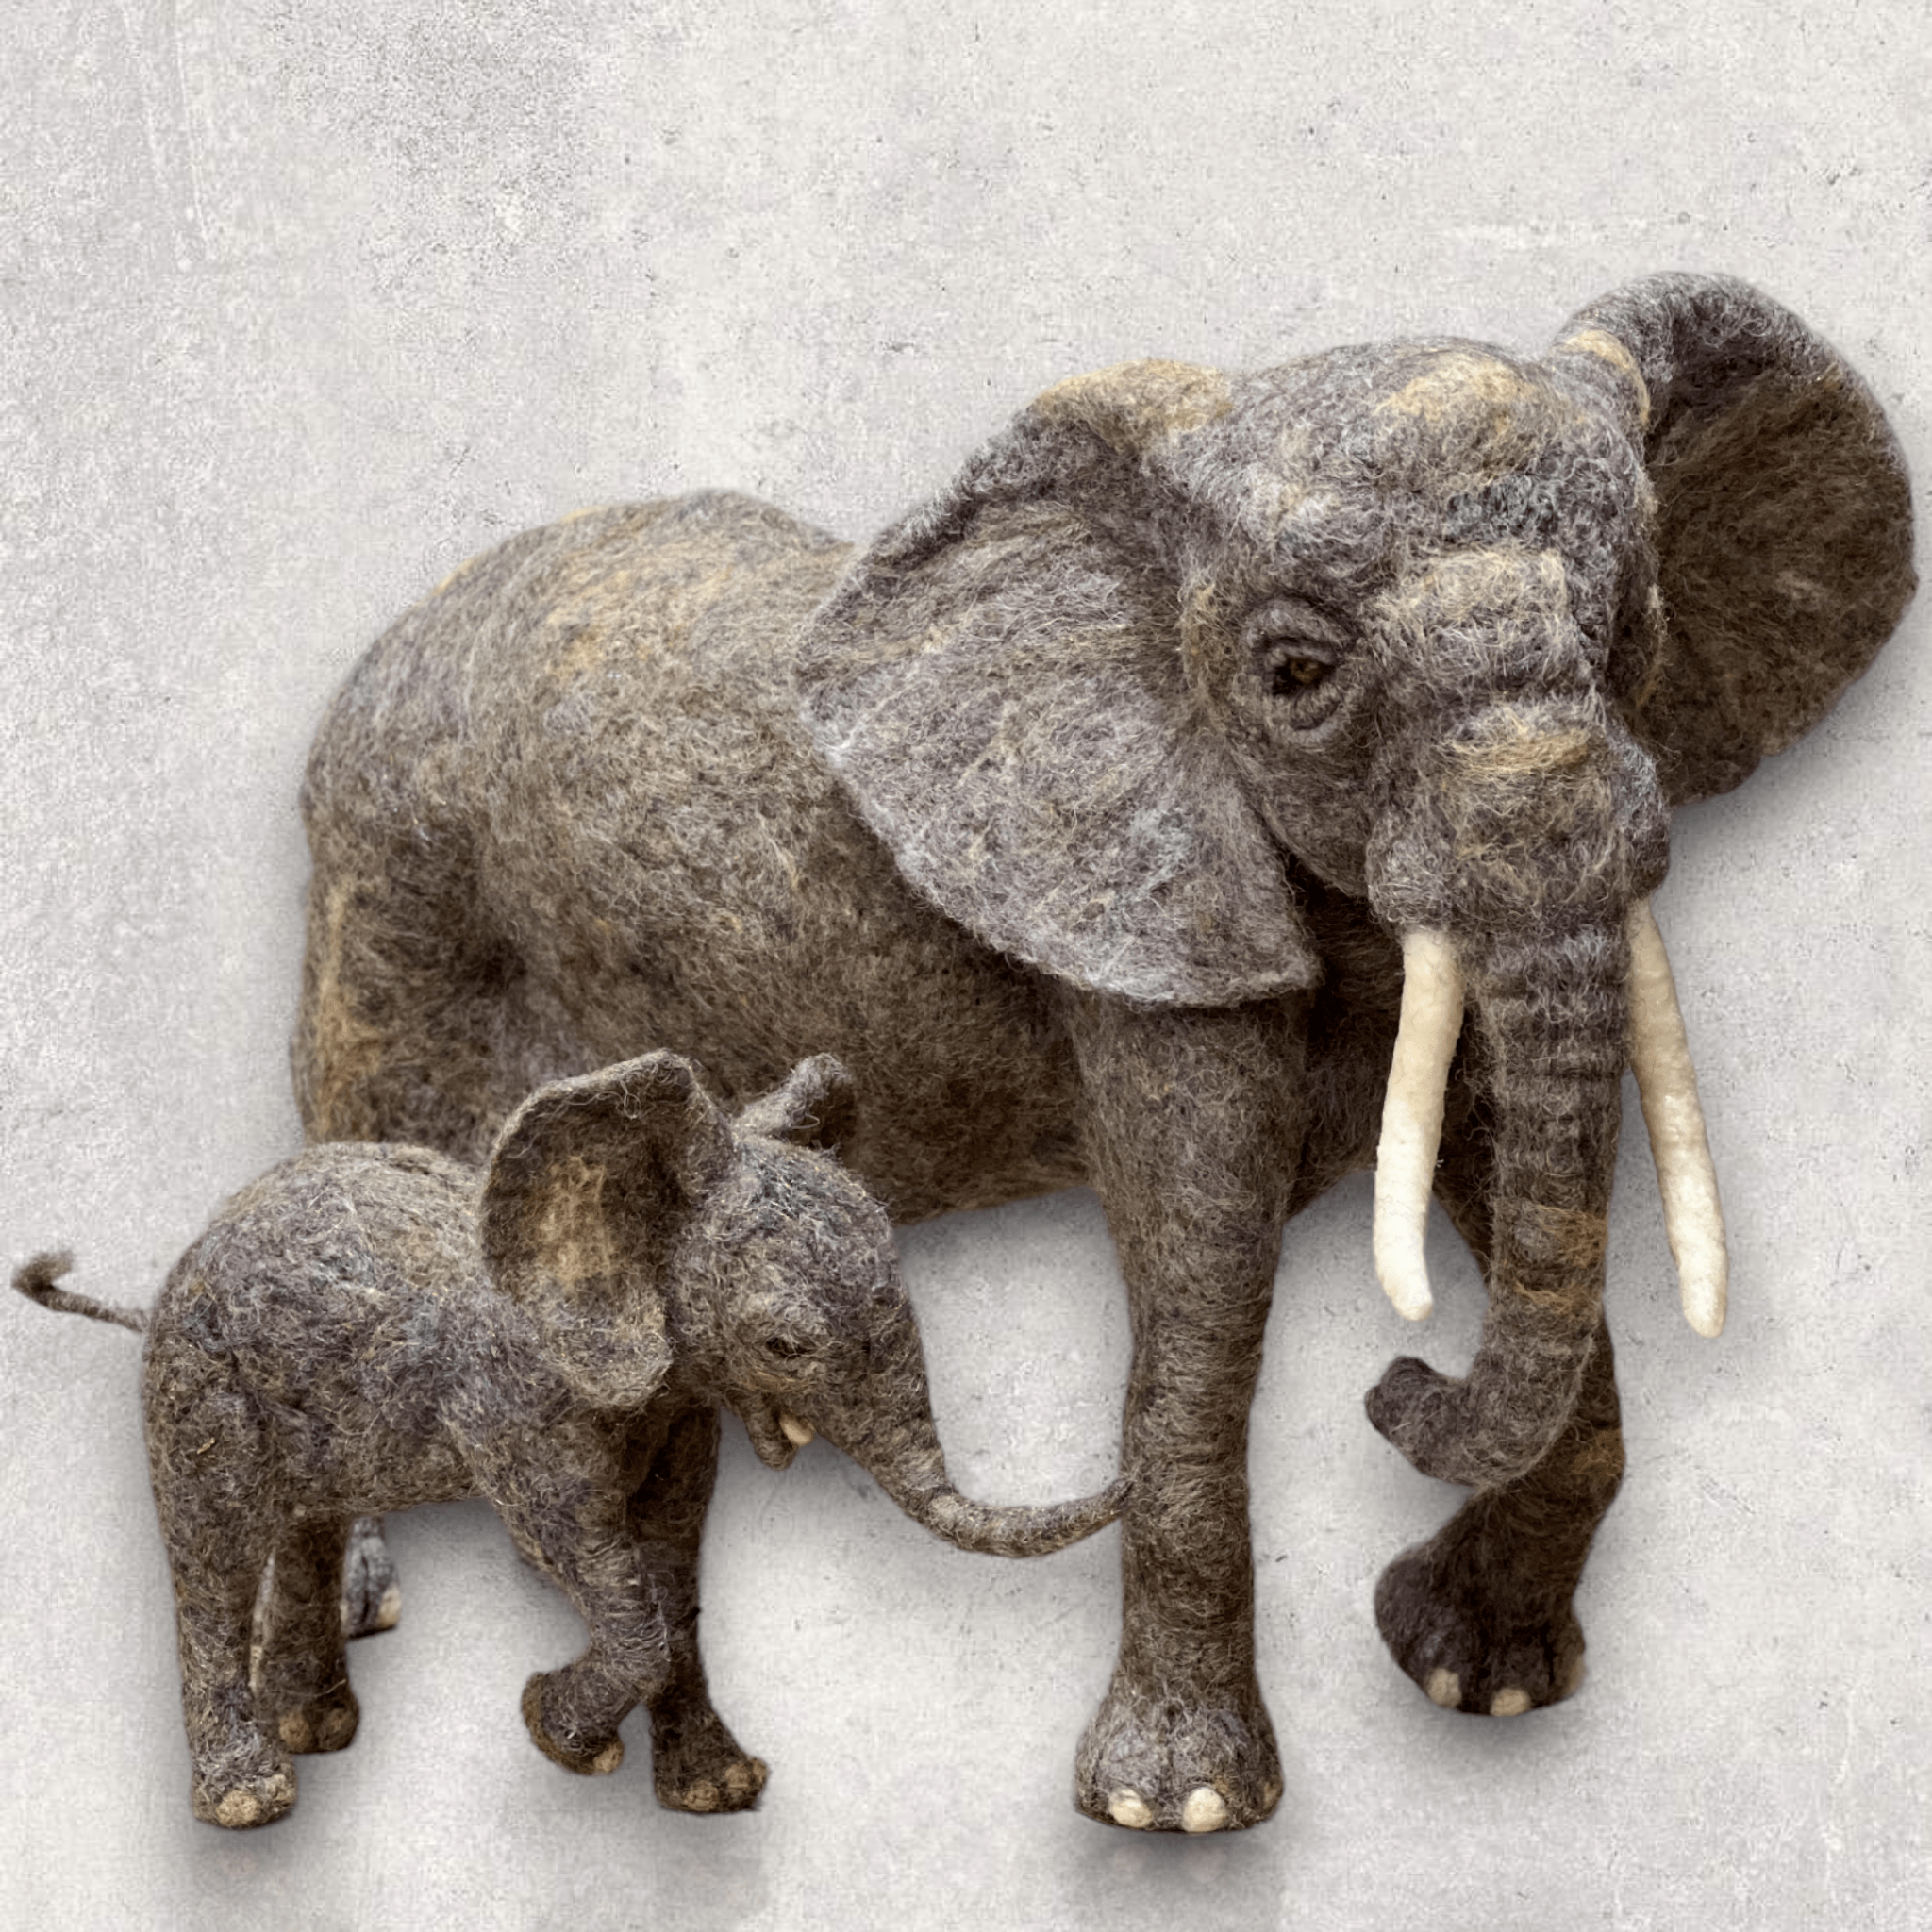 Bull Elephant and his son (sculpture)